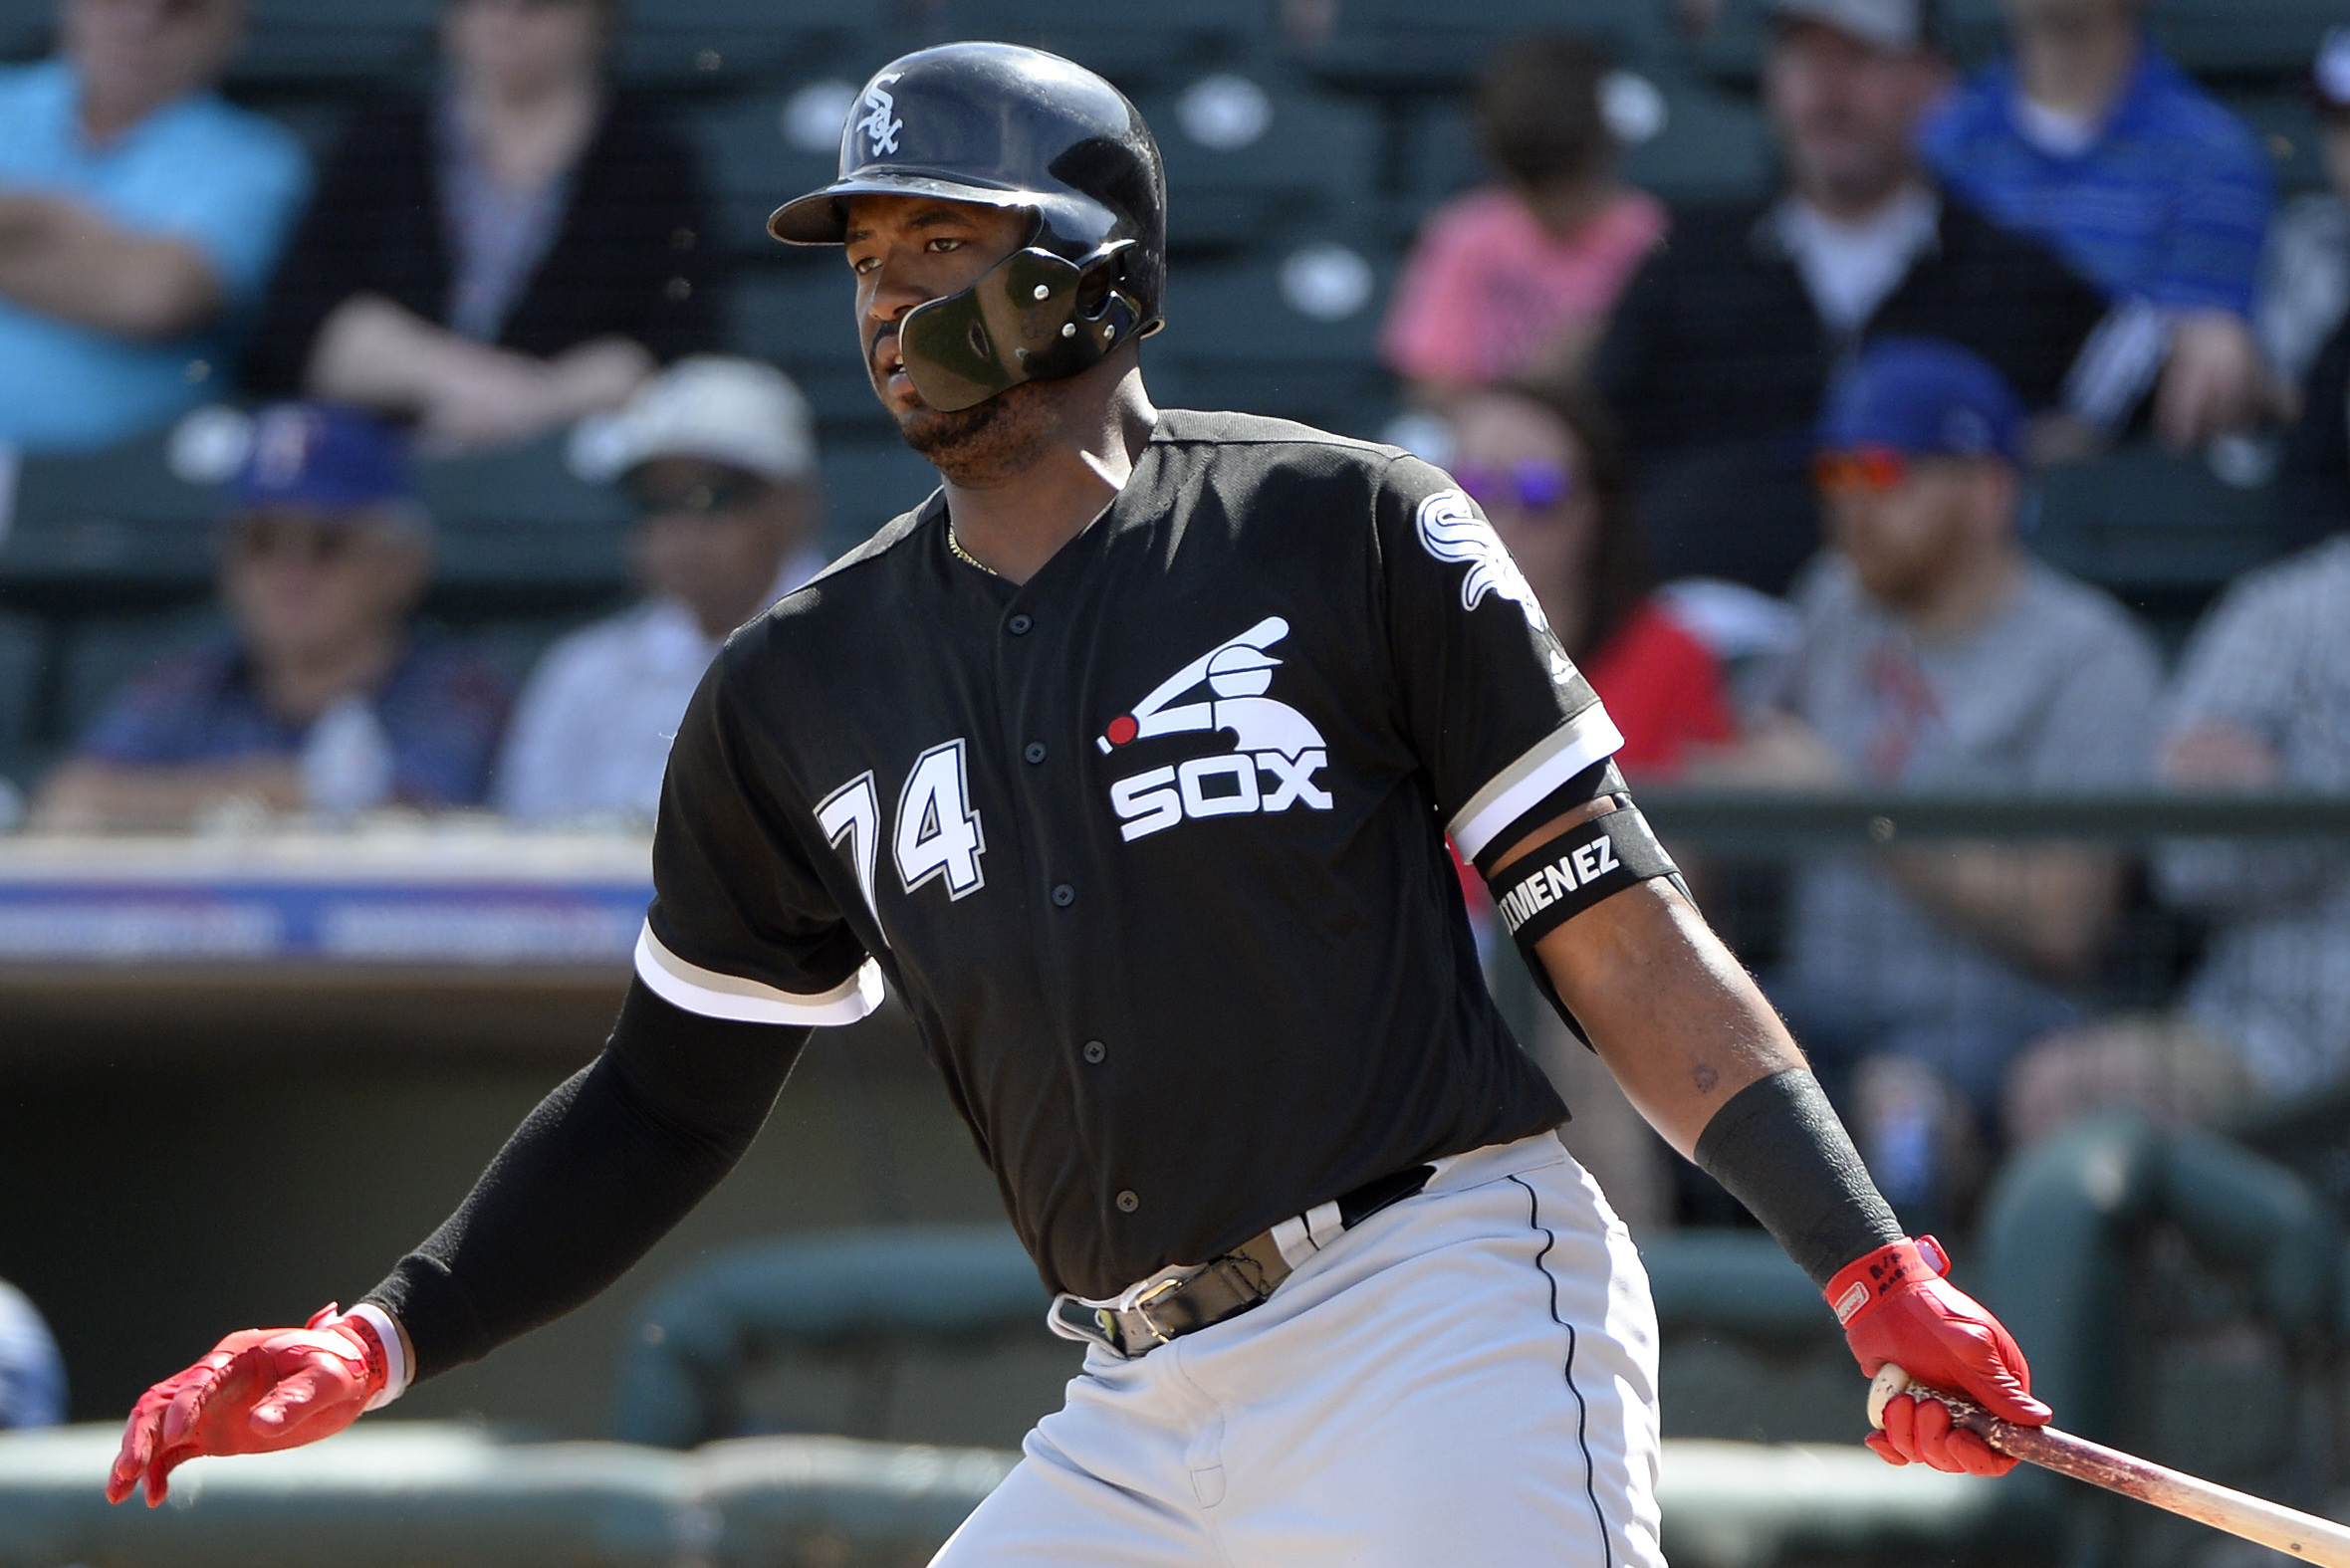 White Sox prospect Eloy Jimenez likely to file service time manipulation  grievance - NBC Sports